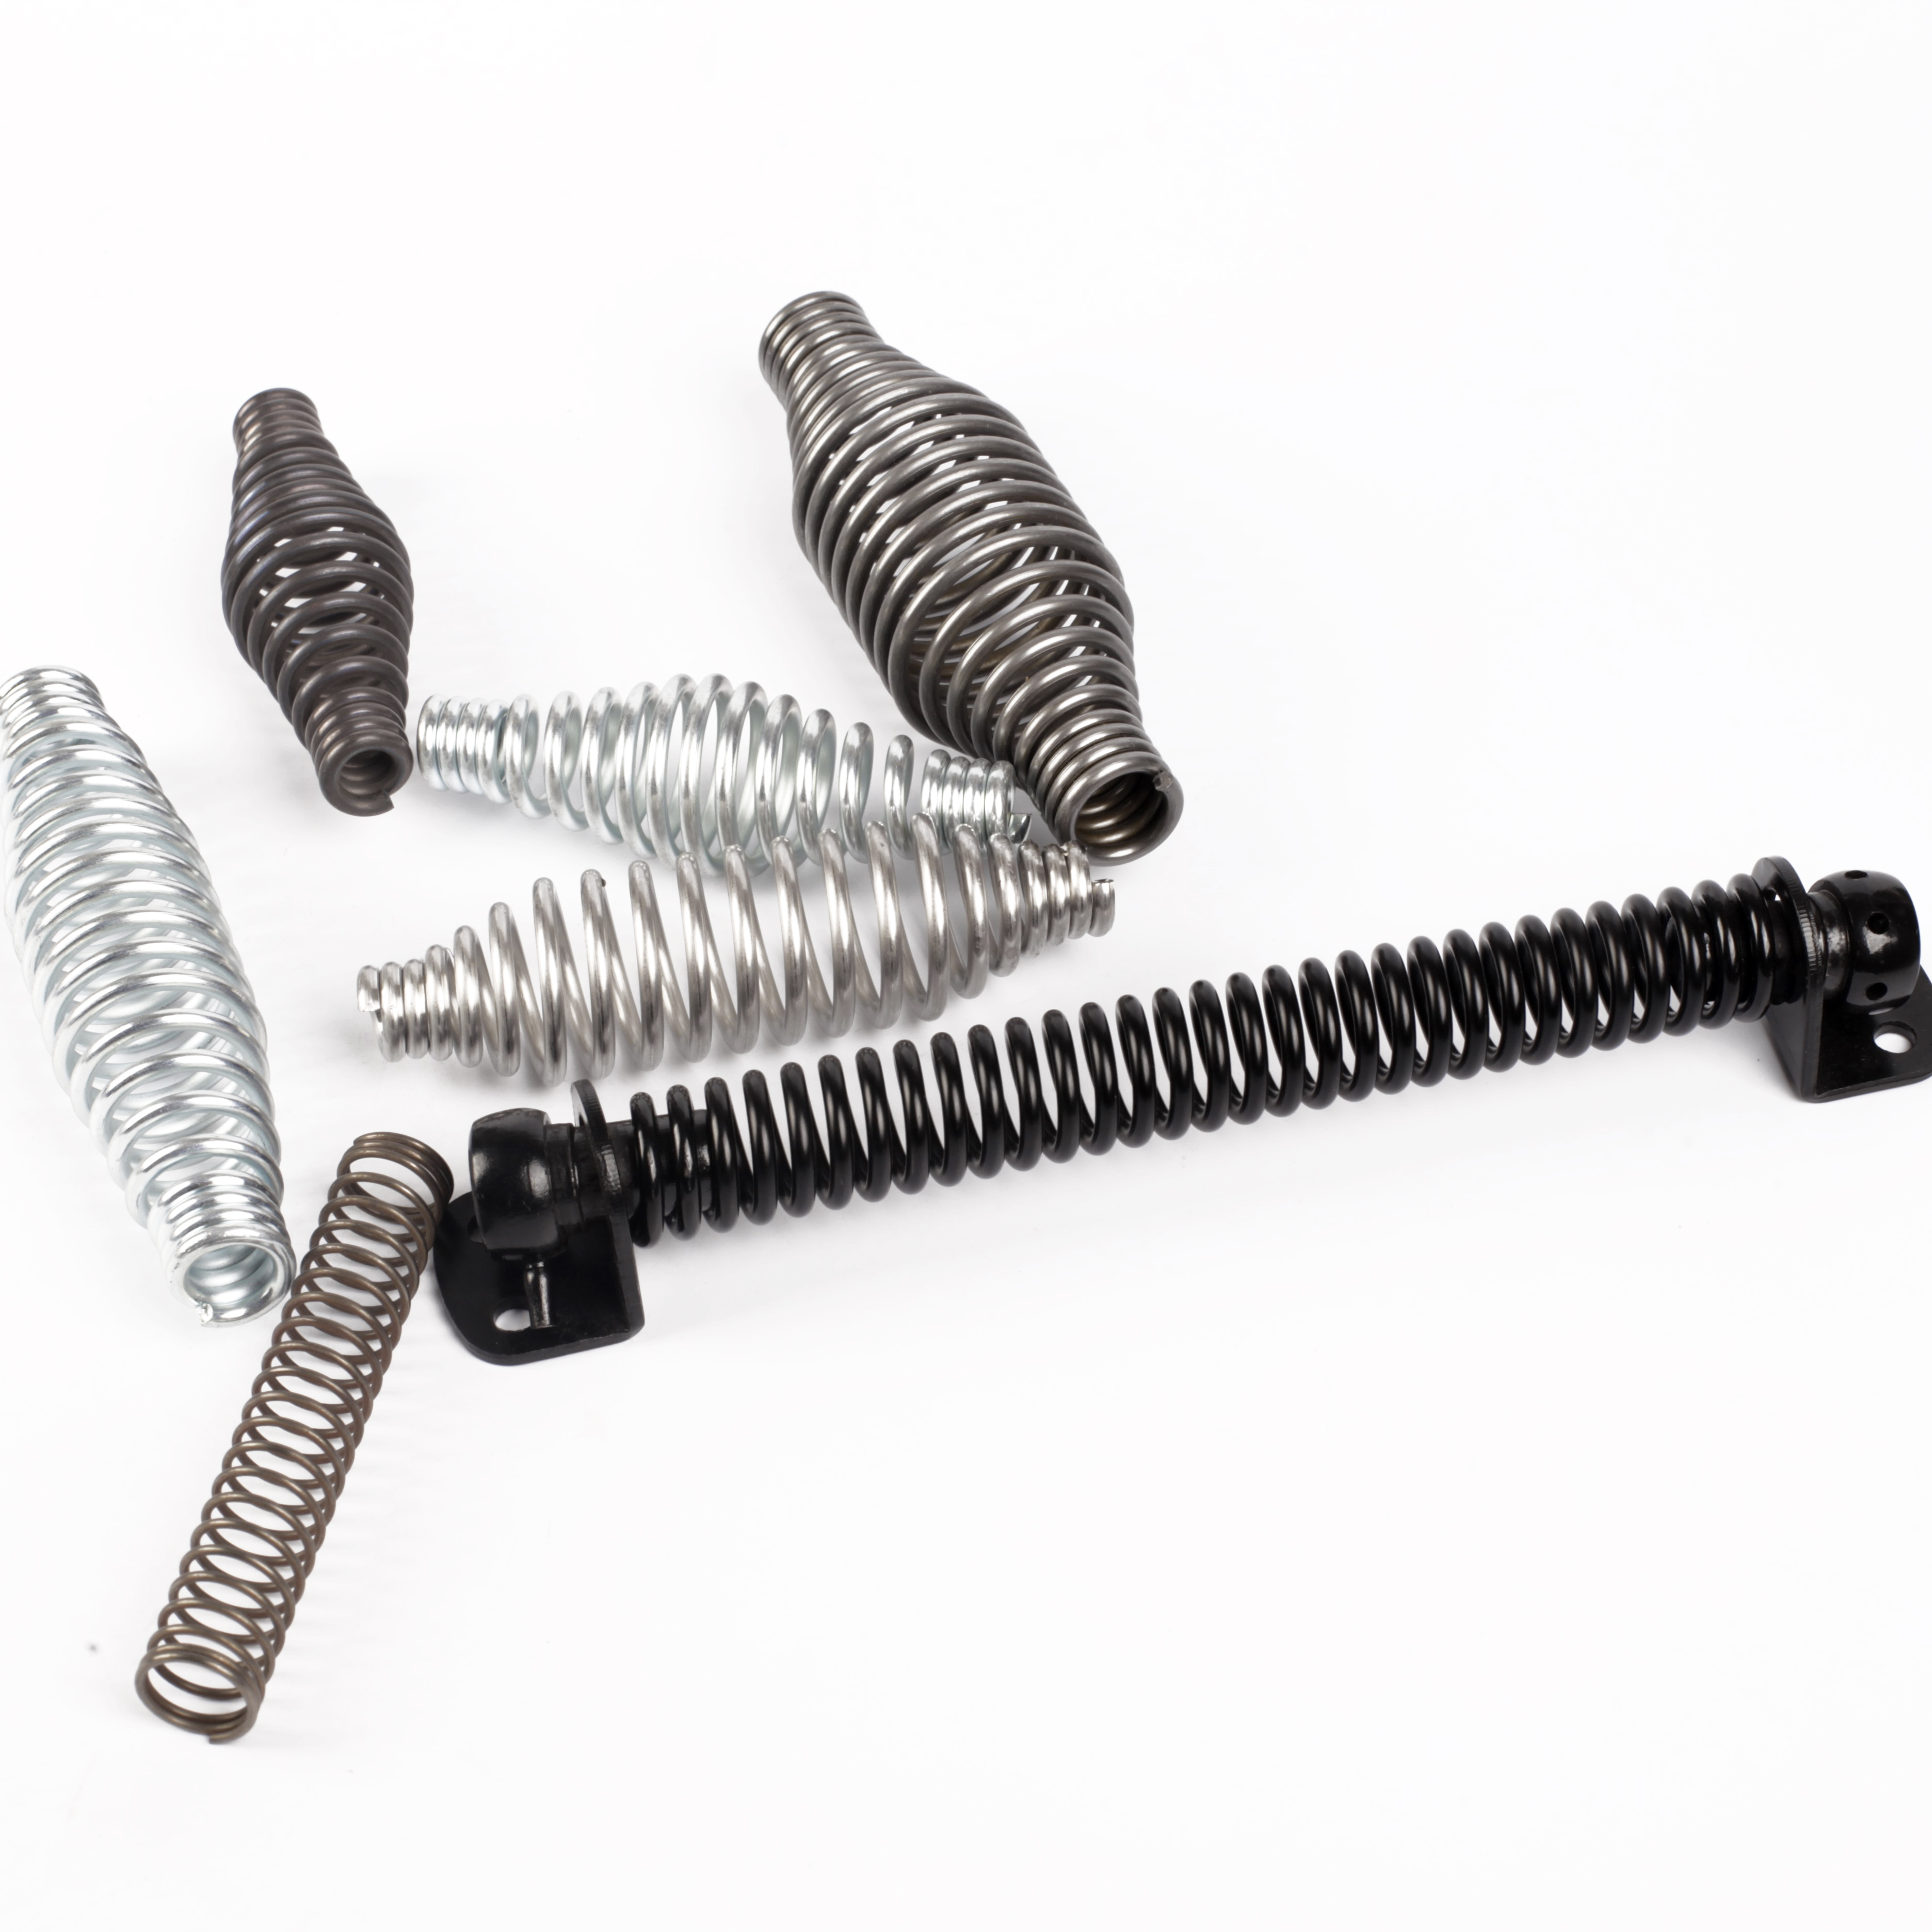 Extension vs Compression Springs: What’s the Difference?